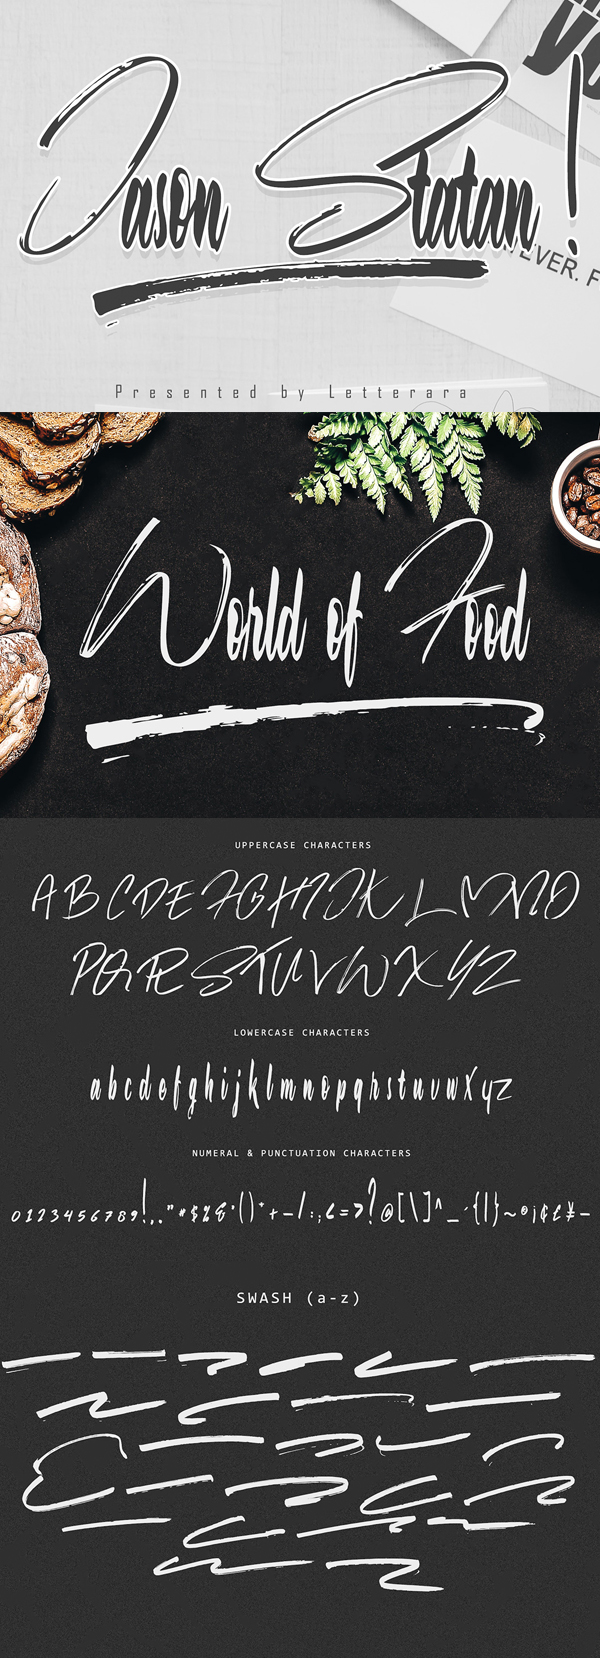 100 Greatest Free Fonts for 2020 - 45